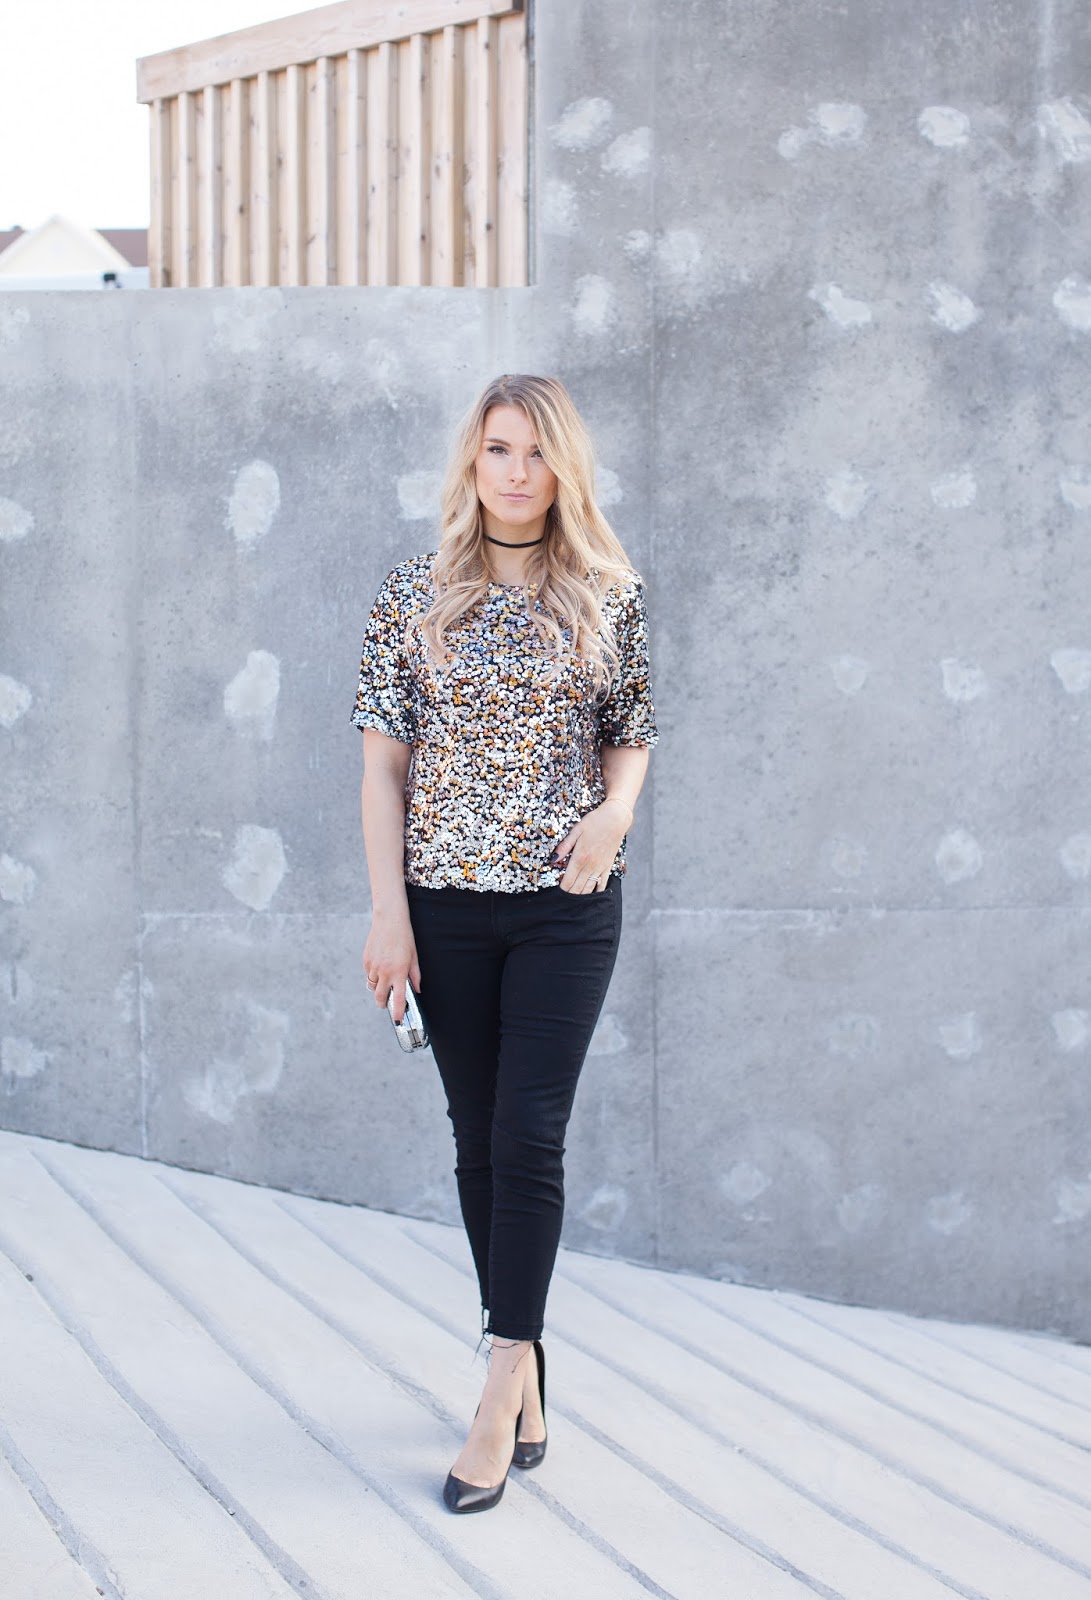 HOW TO PULL OFF A SEQUIN TOP